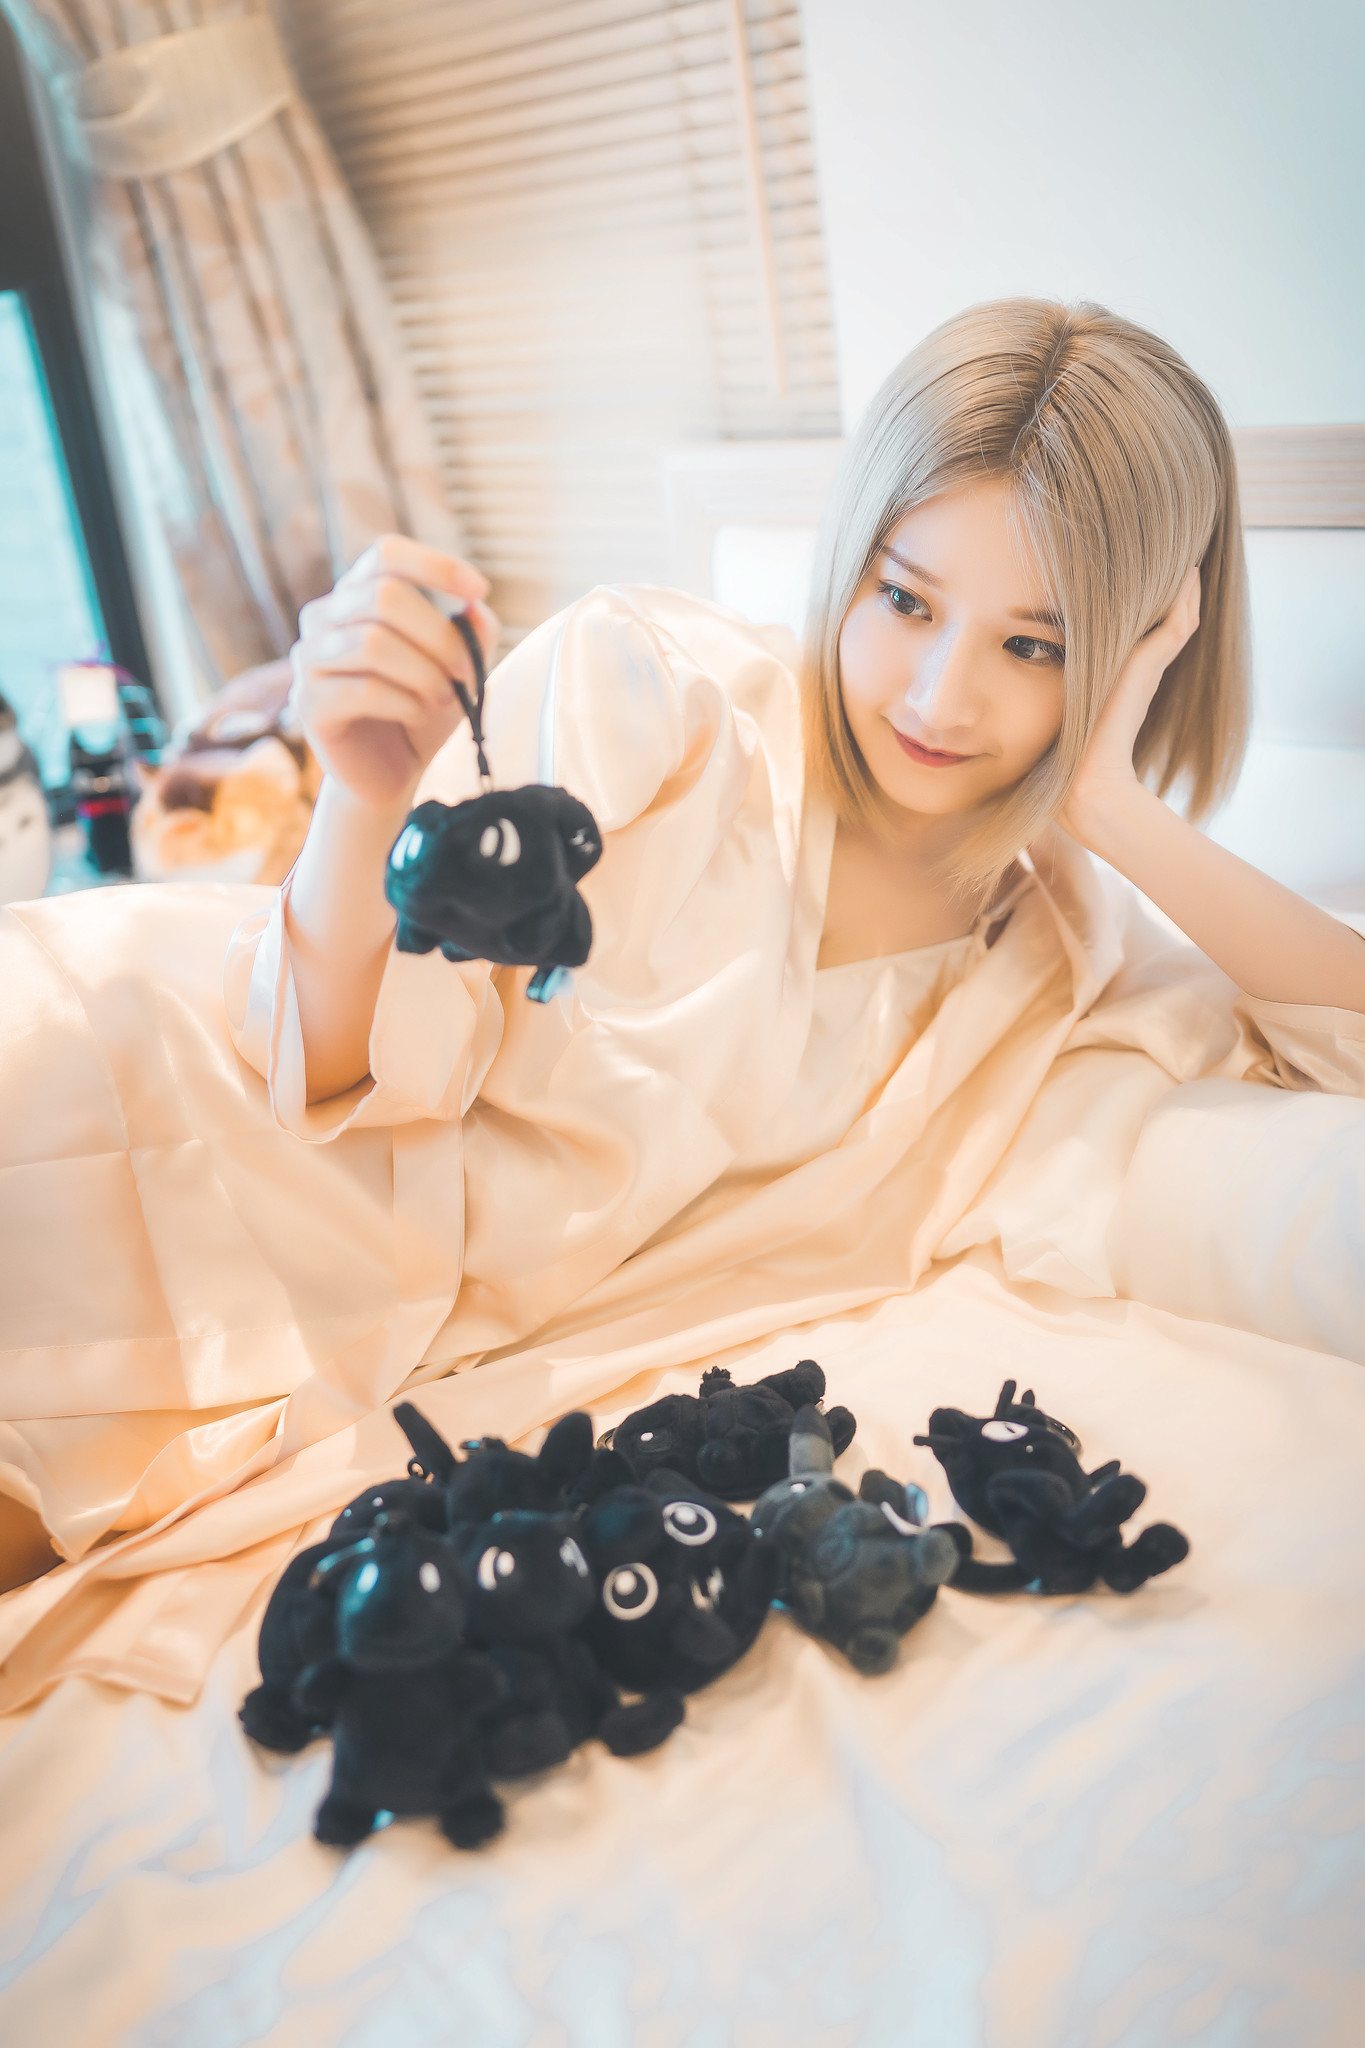 People 1365x2048 Asian model women indoors indoors plush toy toys dyed hair blonde lying on side looking away shoulder length hair in bed bed Pokémon women